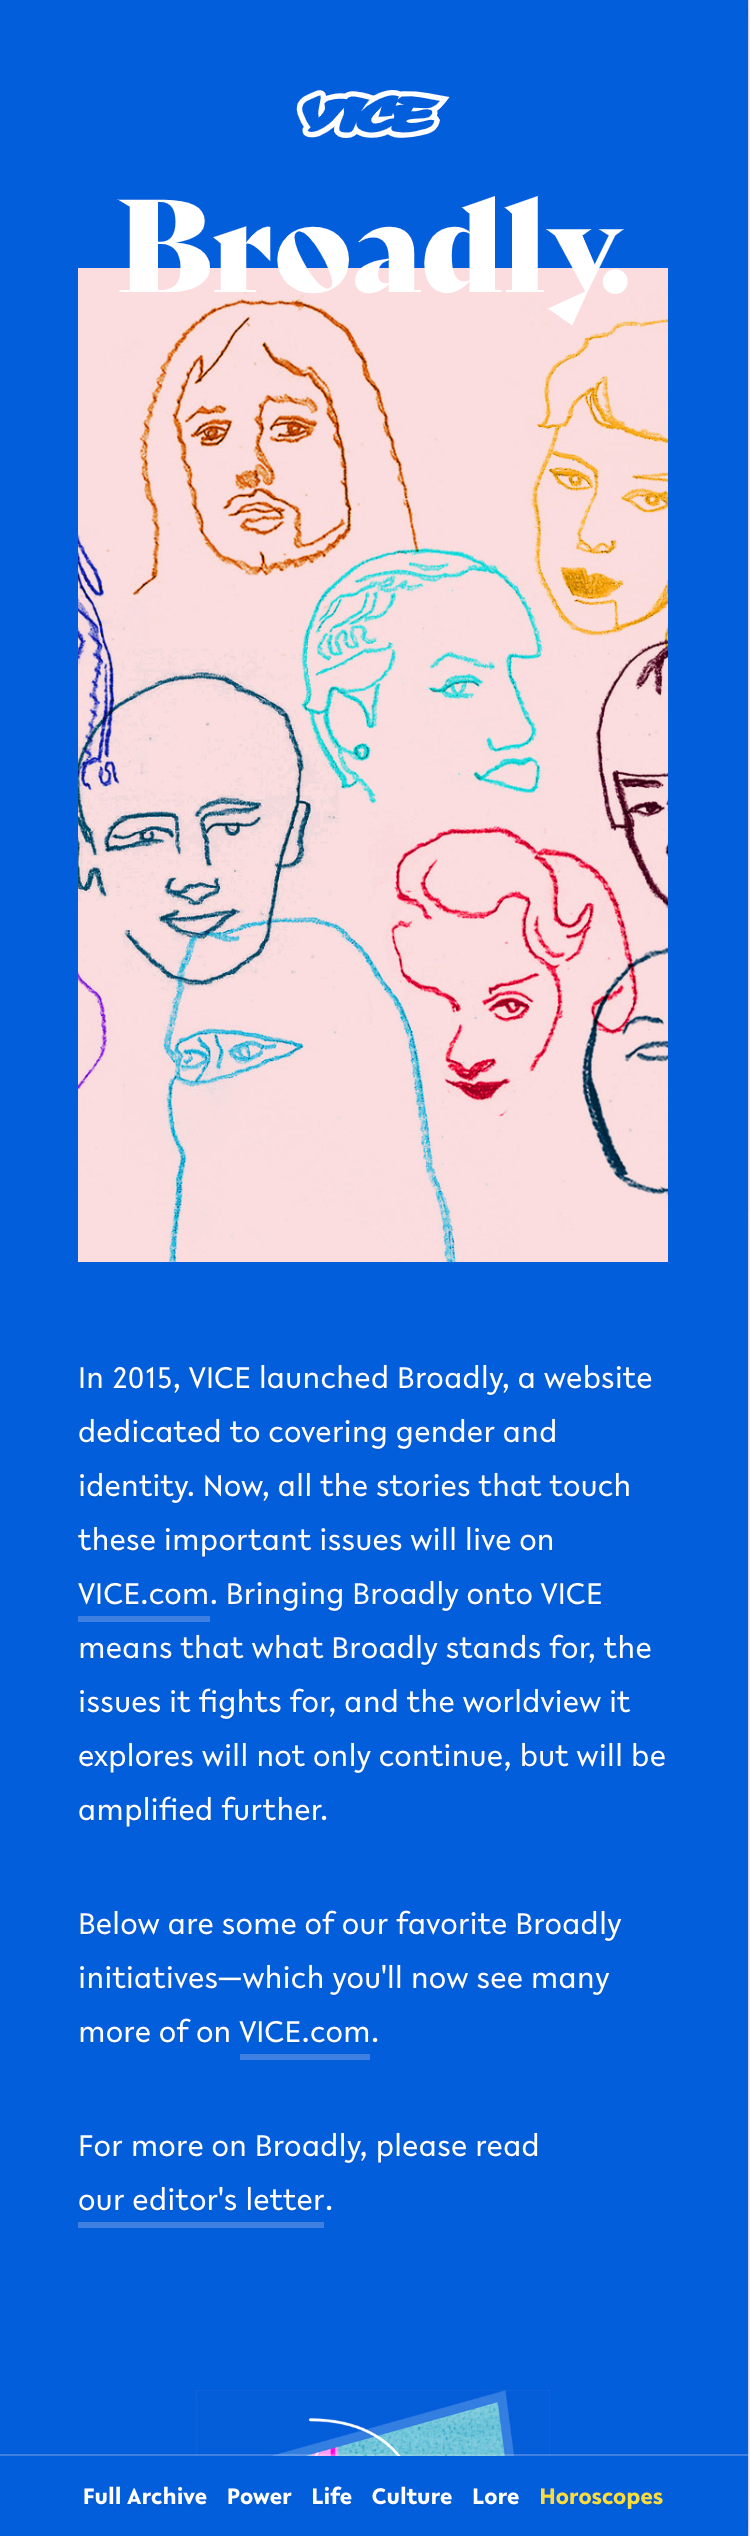 Broadly's post-launch microsite